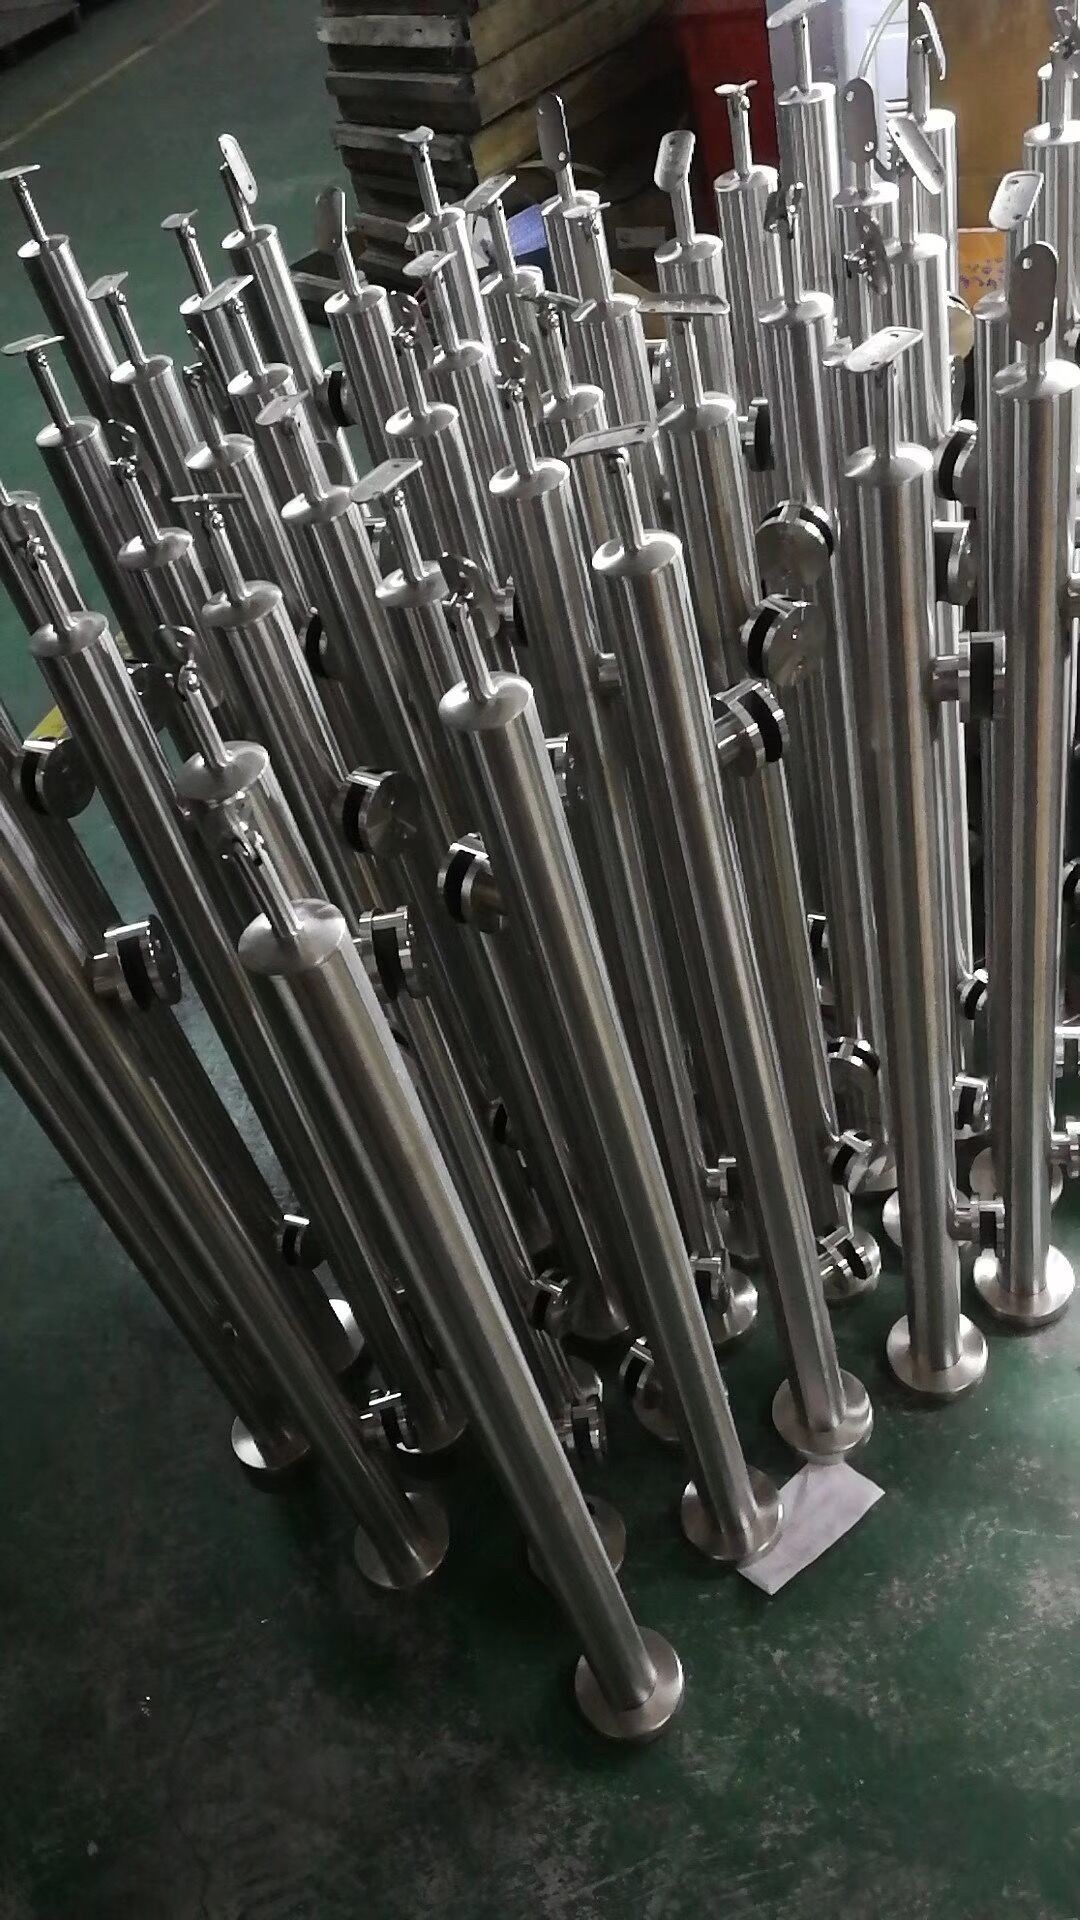 Satin / Mirror Stainless Steel Balustrade Posts For Glass Railing System